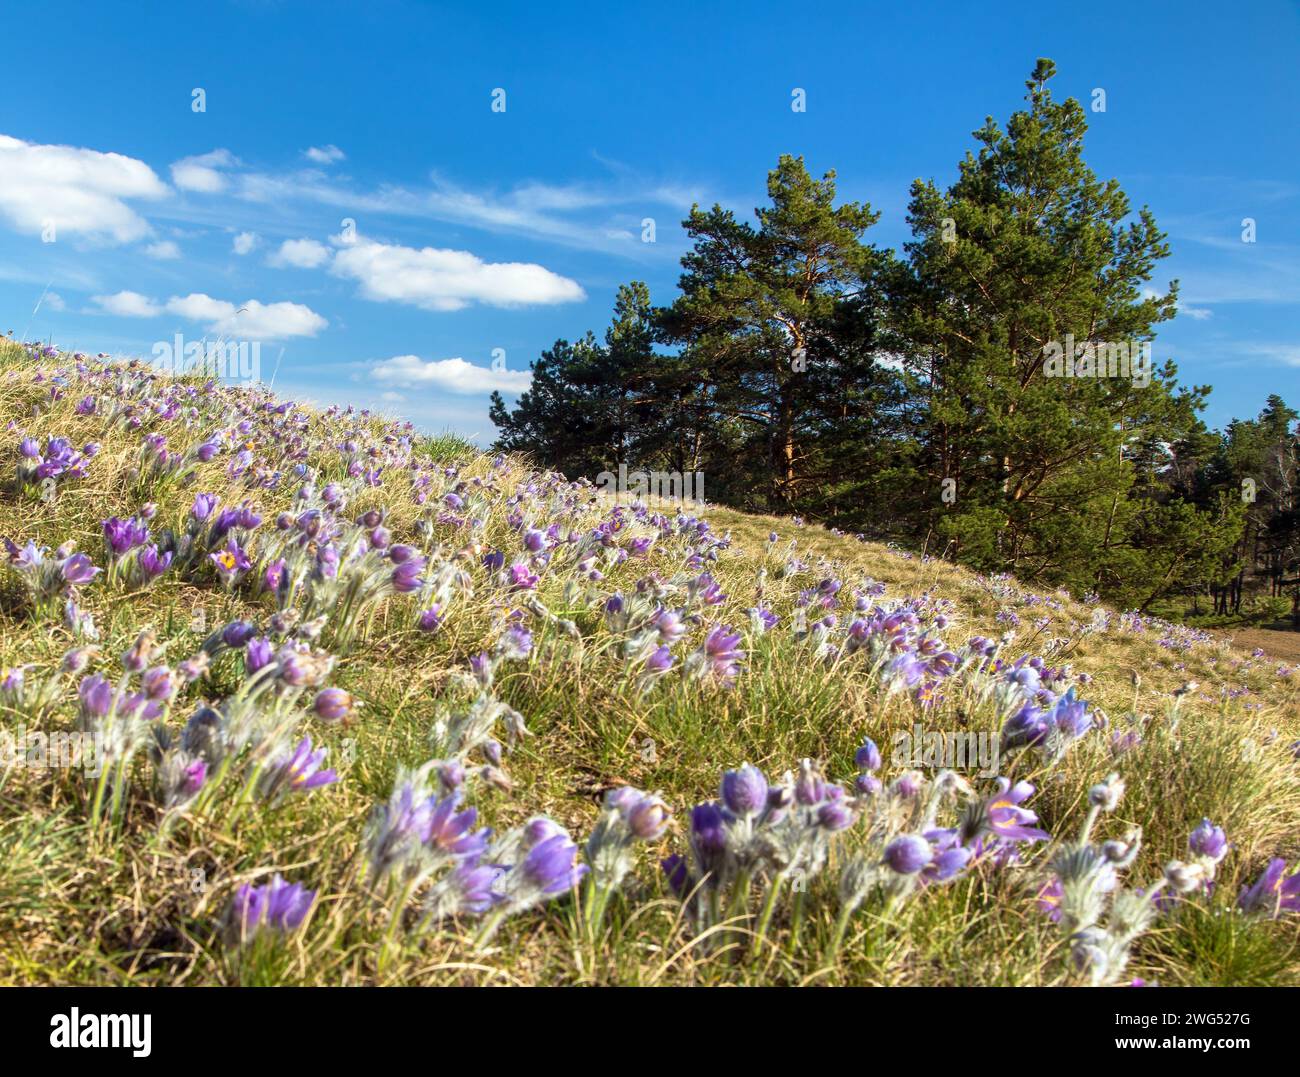 meadow full of greater pasqueflowers in latin pulsatilla grandis and pine trees Stock Photo